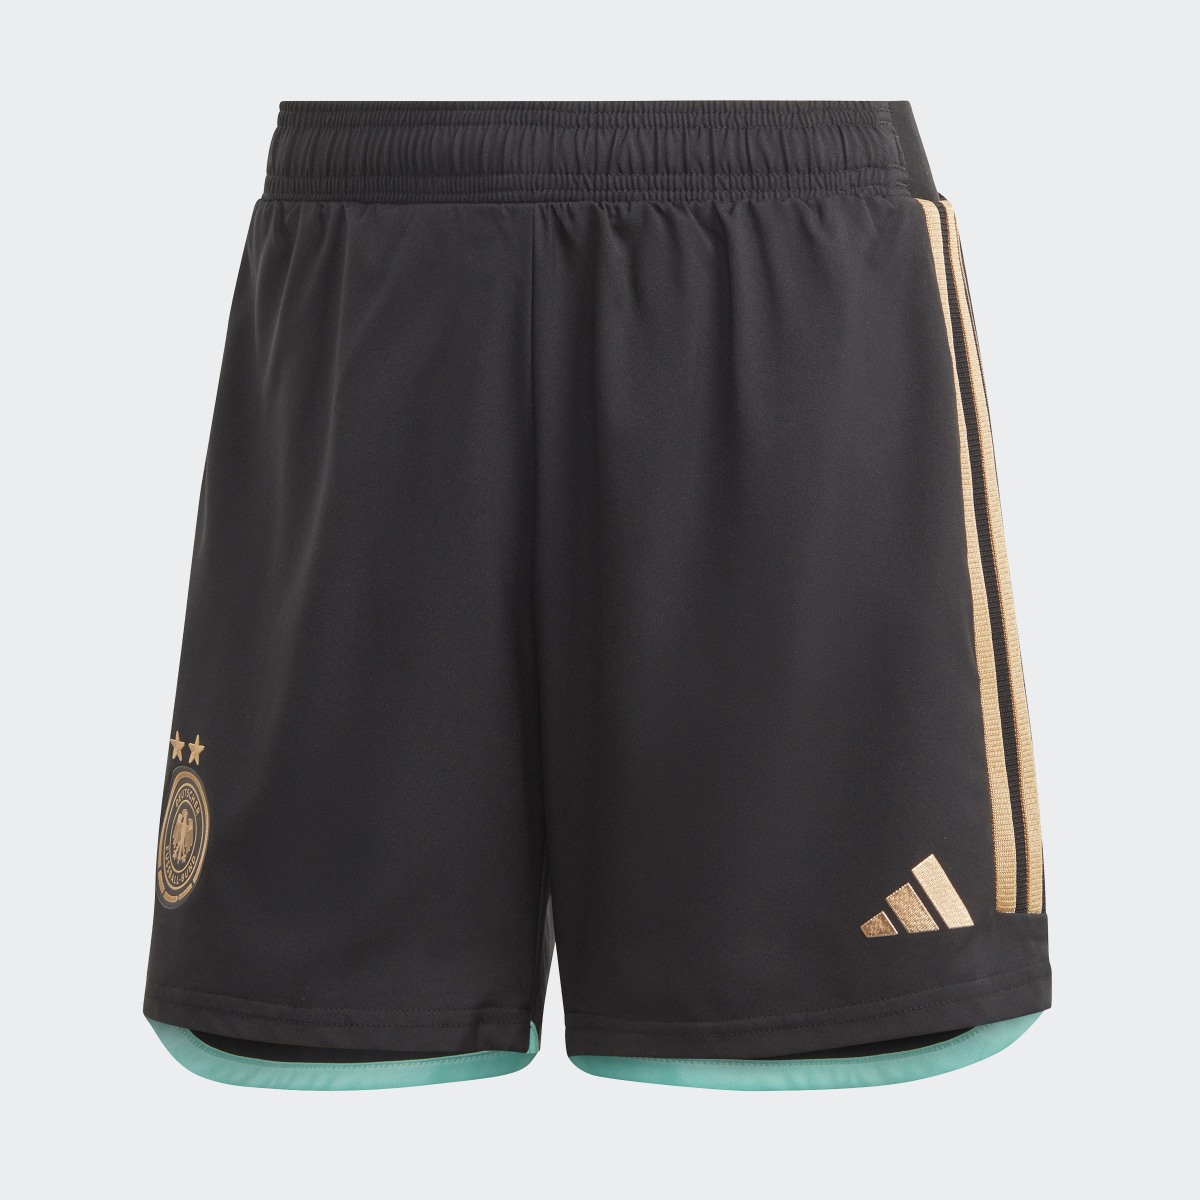 Adidas Short Away Authentic 23 Women's Team Germany. 4